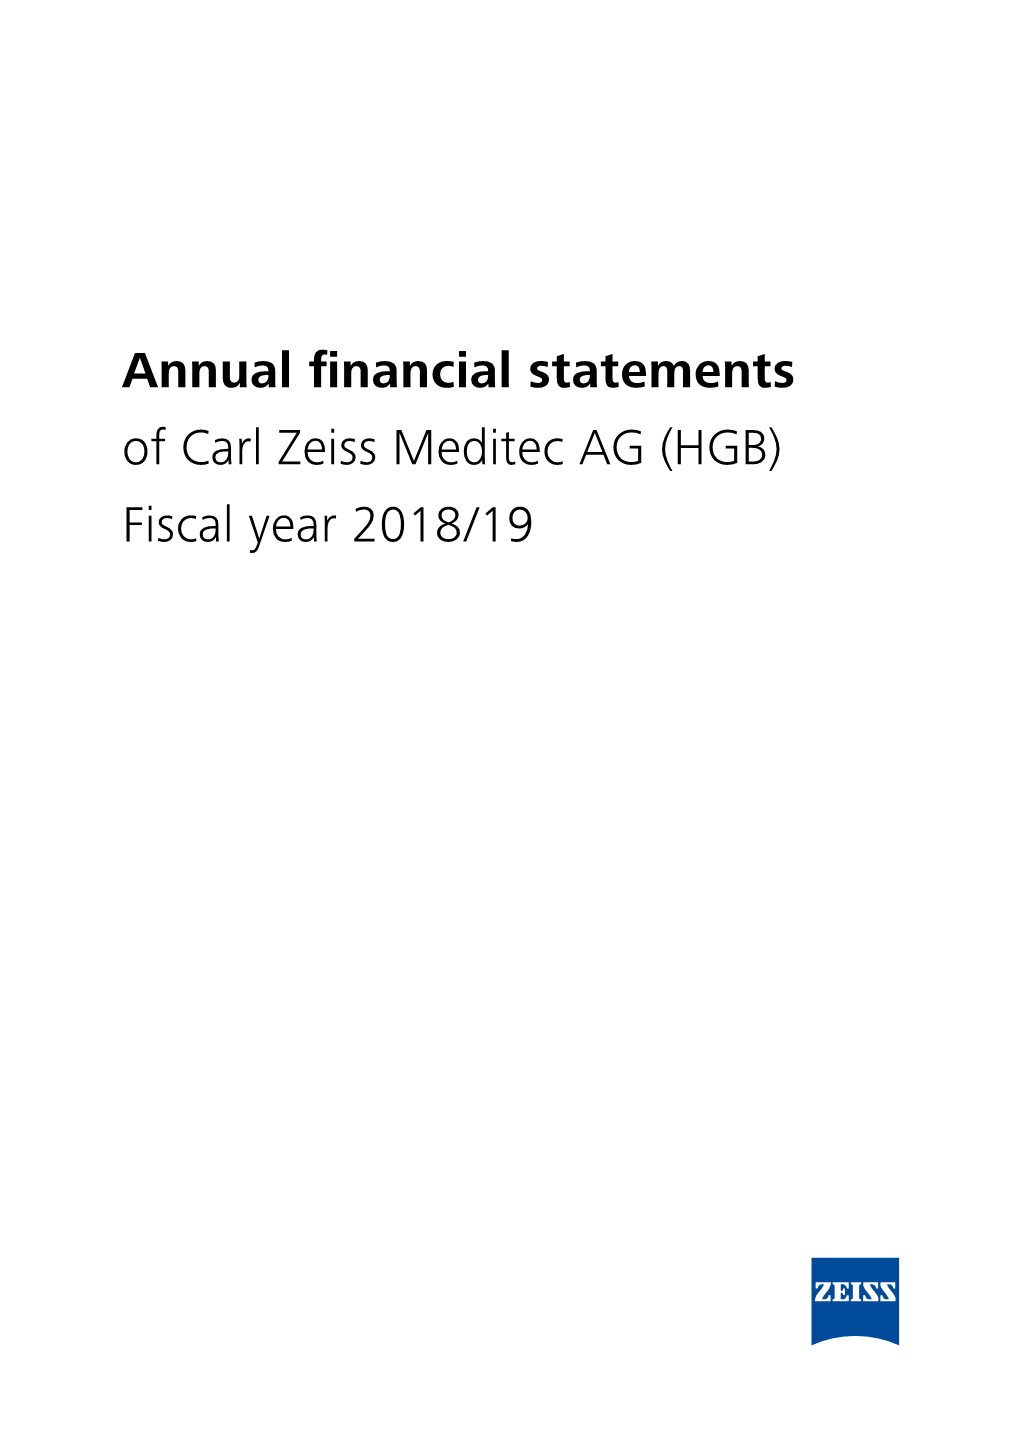 Annual Financial Statements of Carl Zeiss Meditec AG (HGB) Fiscal Year 2018/19 Contents